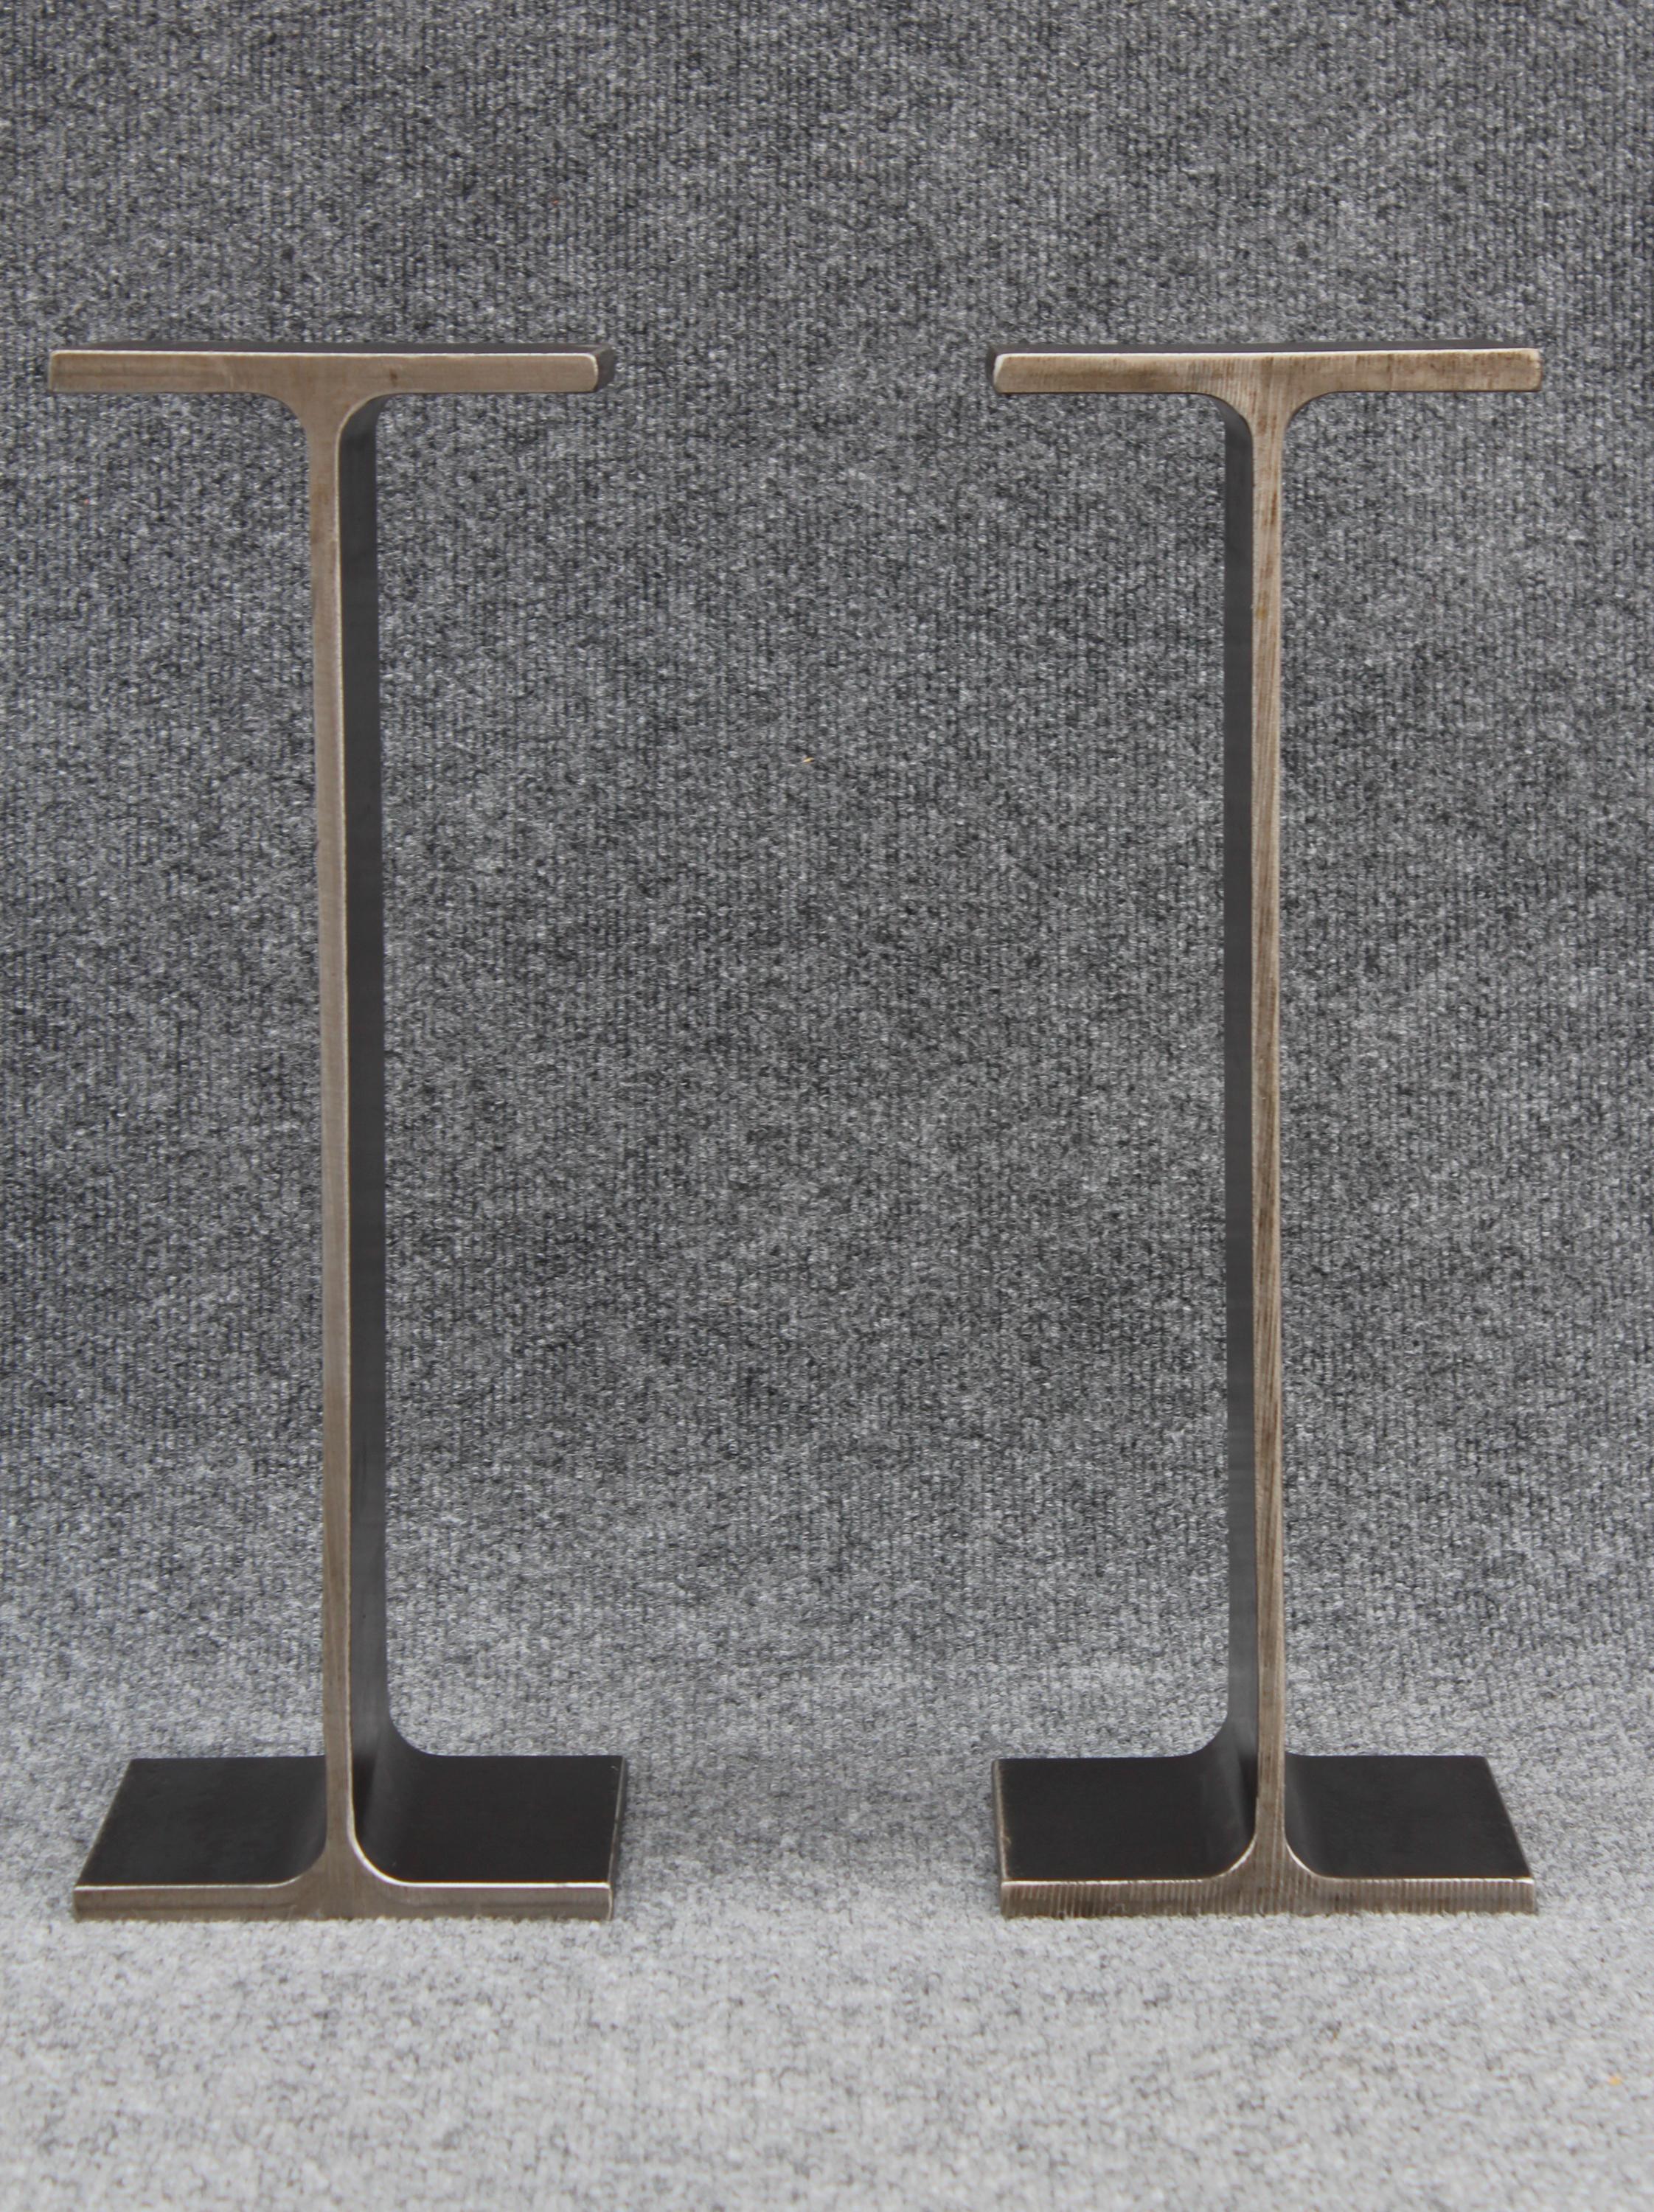 Contemporary Ward Bennett Inspired Pair Enameled Steel I-Beam Drink Stands or End Tables  For Sale